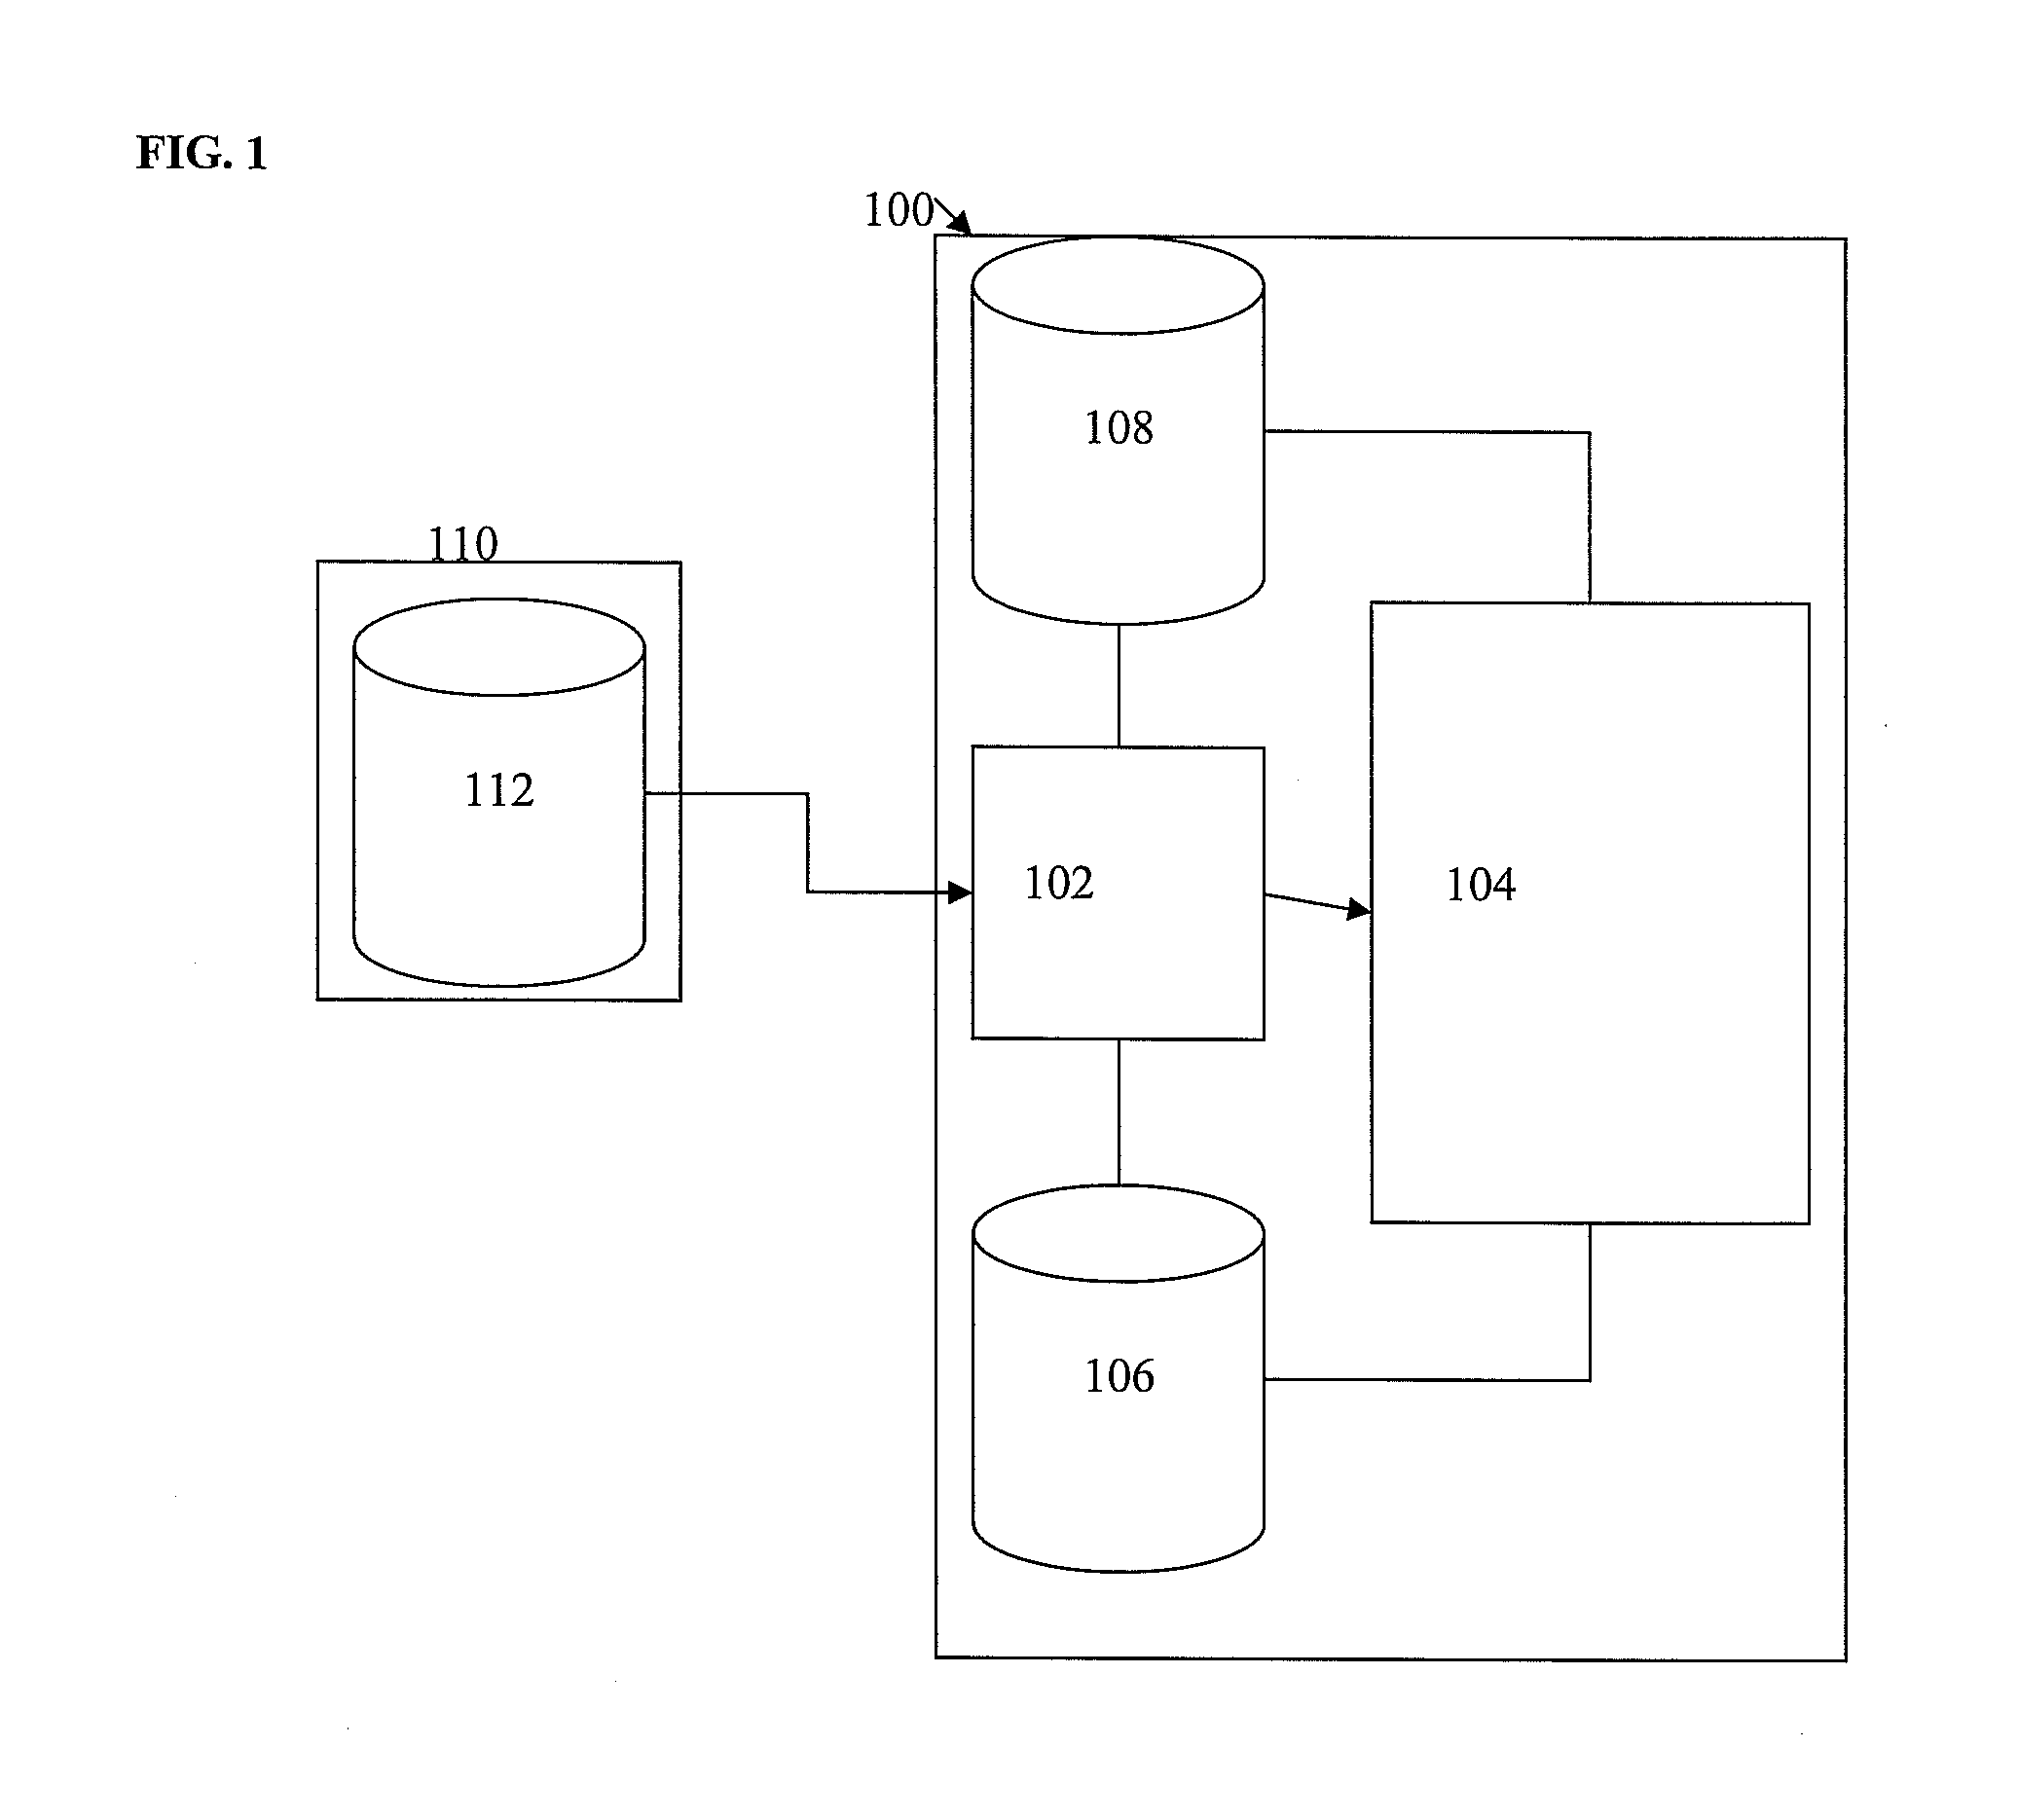 Method and System for Automatically Defining Organizational Data in Unified Messaging Systems